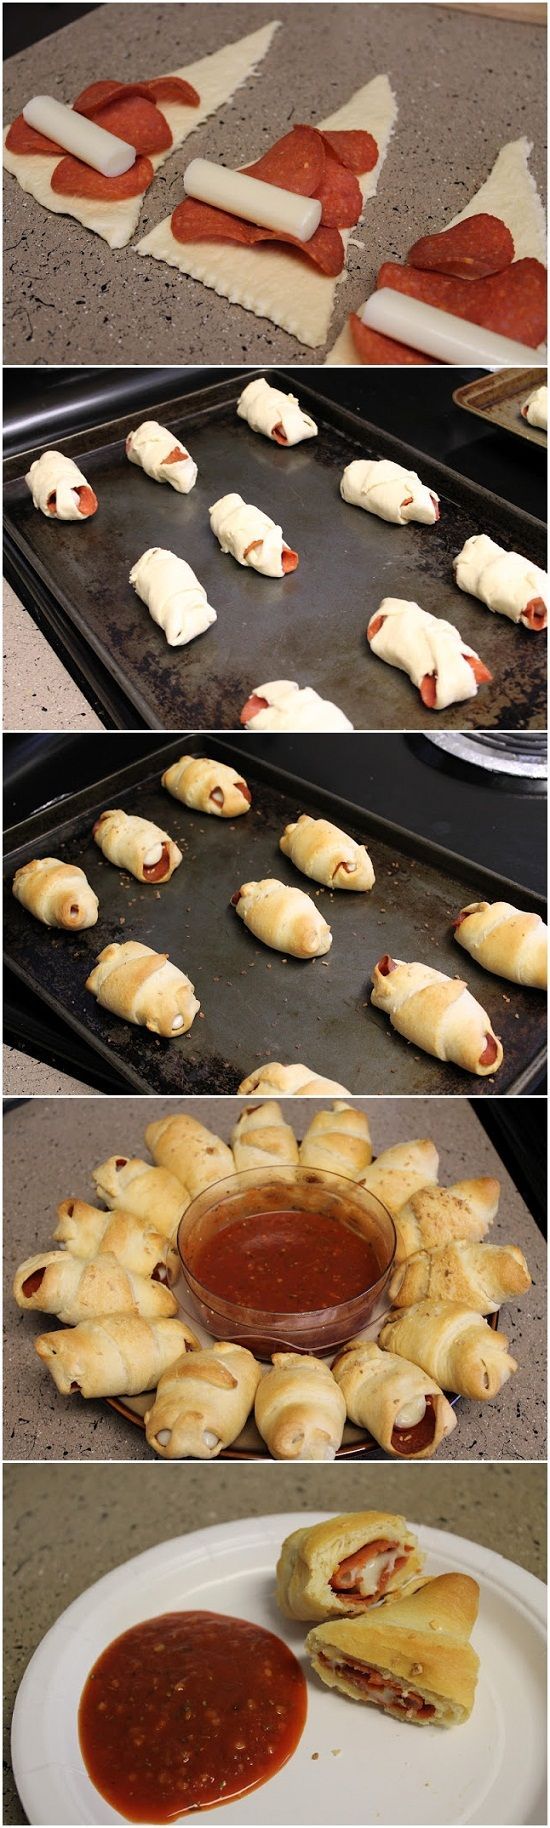 Crescent Pepperoni Roll-Ups  Great for a Superbowl snack or tailgating snack